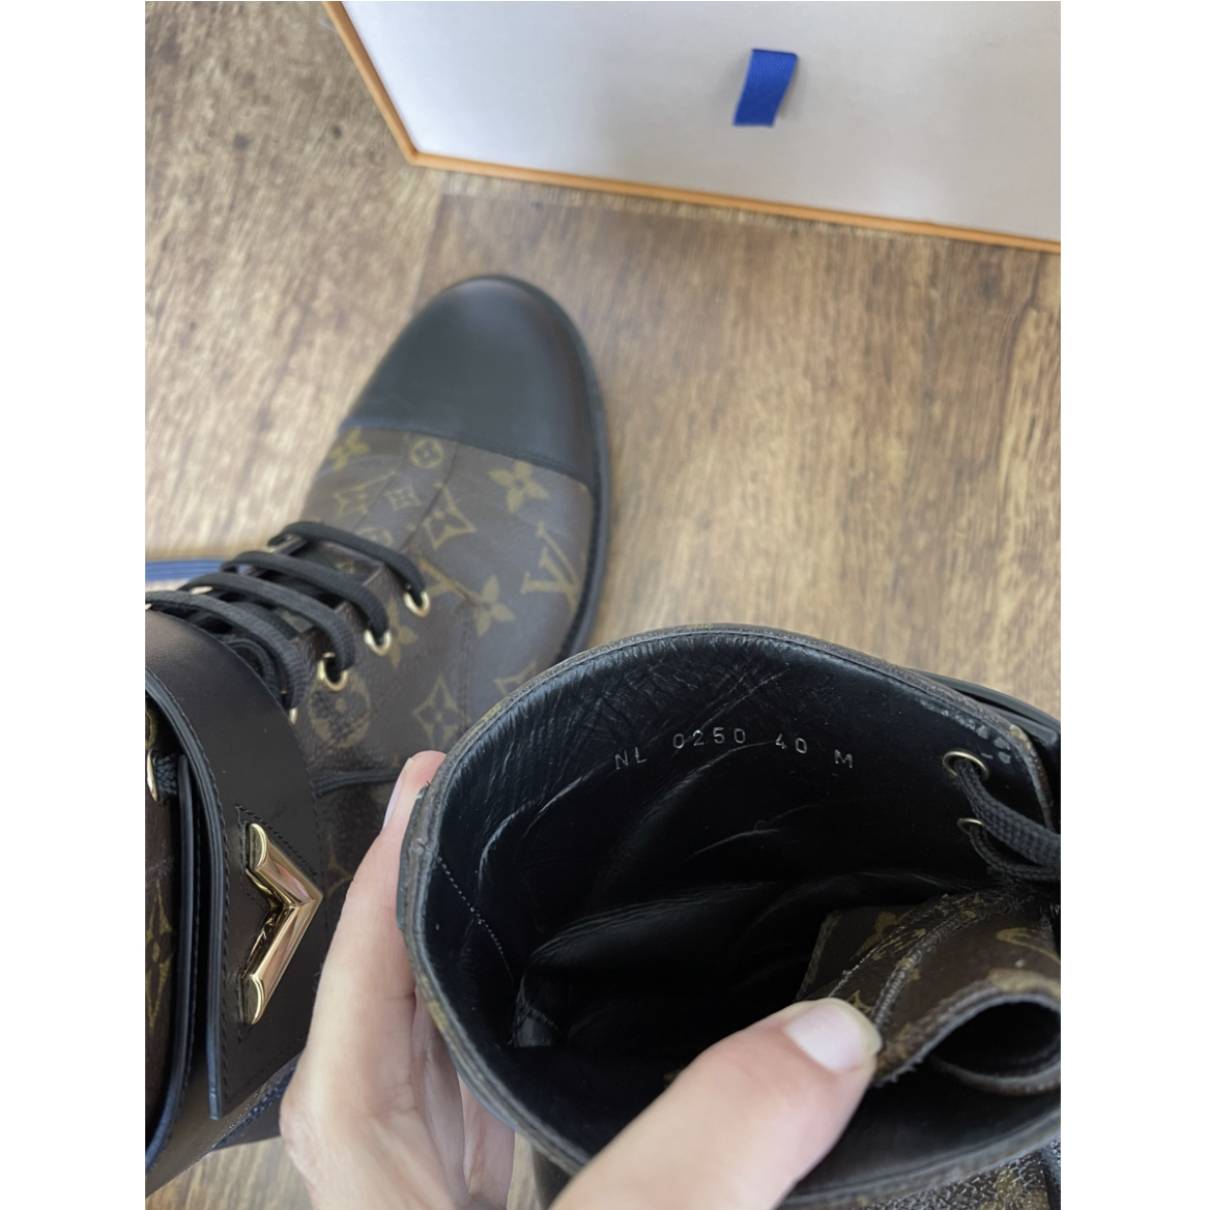 Louis Vuitton Ankle Boots & Booties for Women - Poshmark